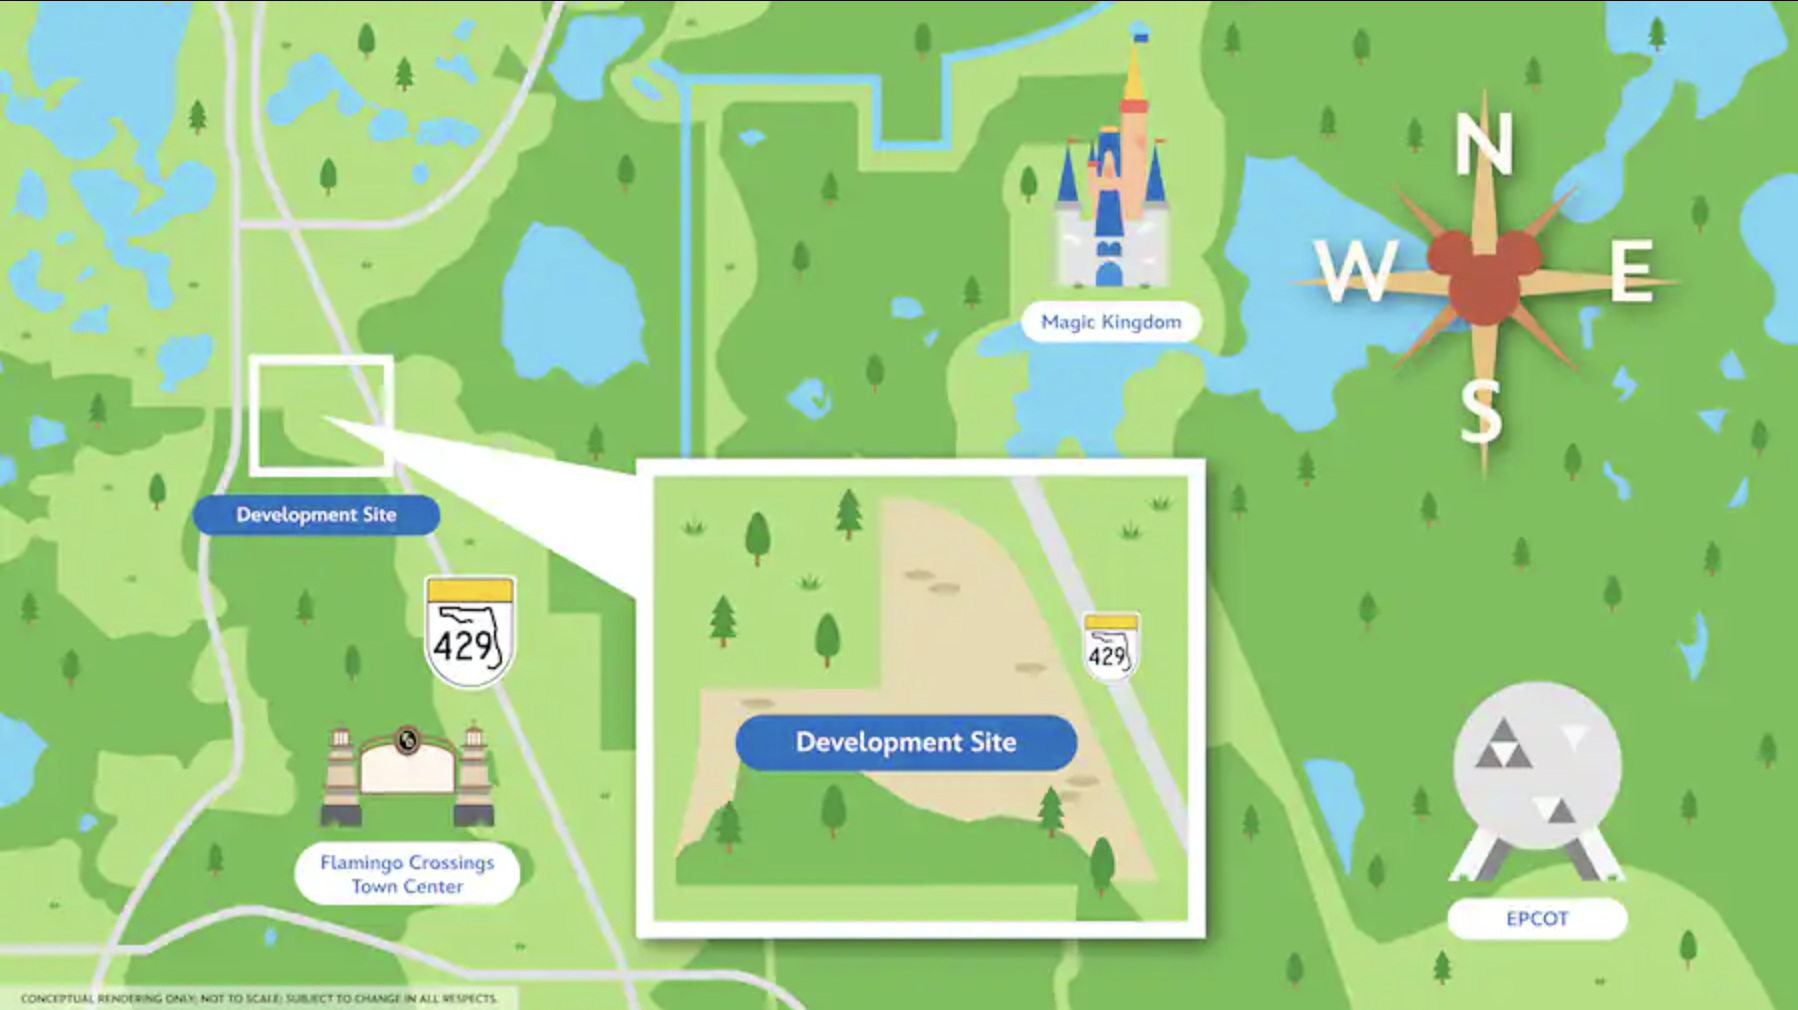 map graphic with magic kingdom and flamingo crossings near 429